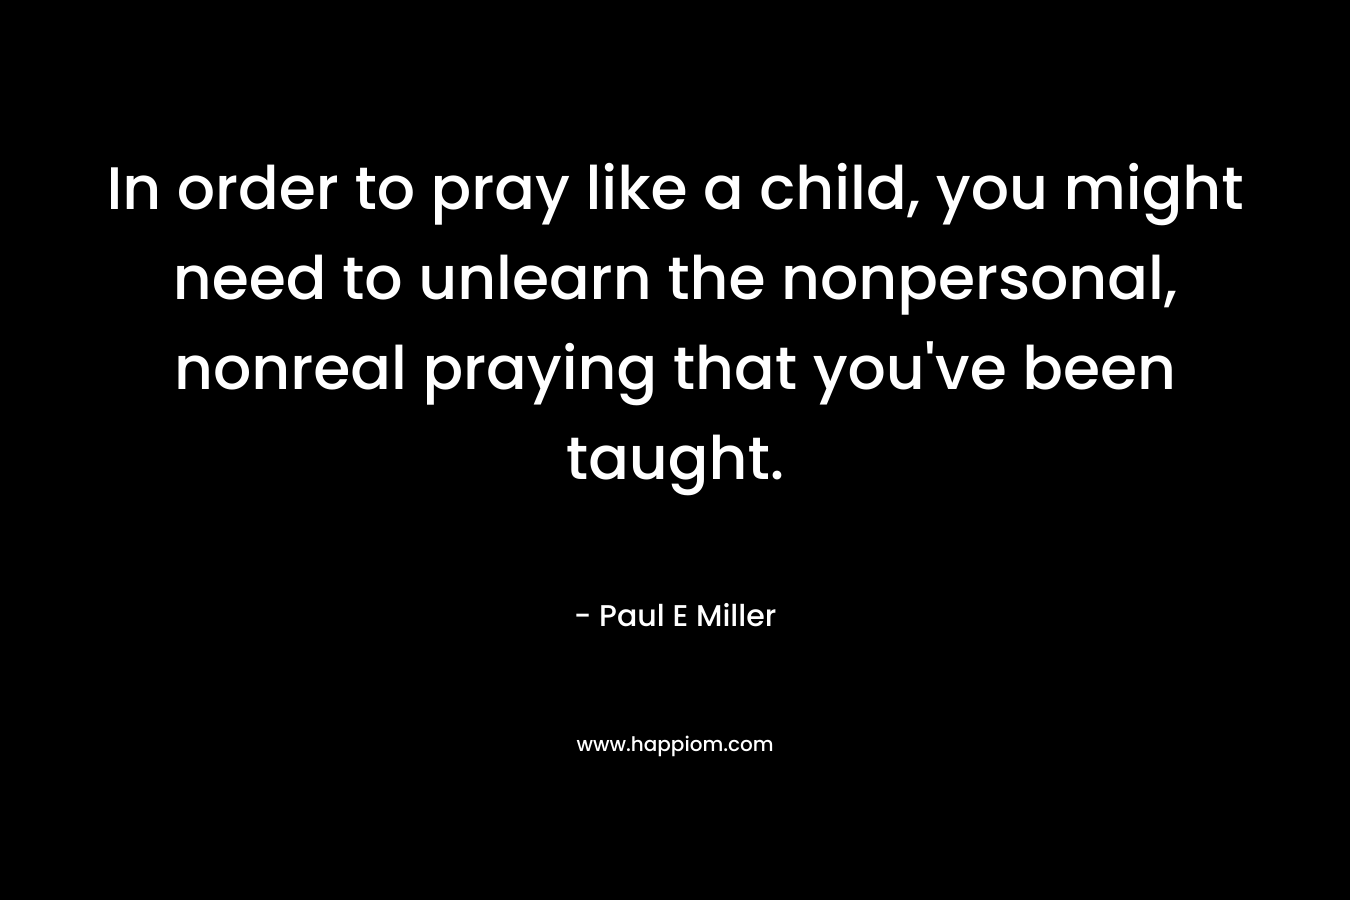 In order to pray like a child, you might need to unlearn the nonpersonal, nonreal praying that you've been taught.